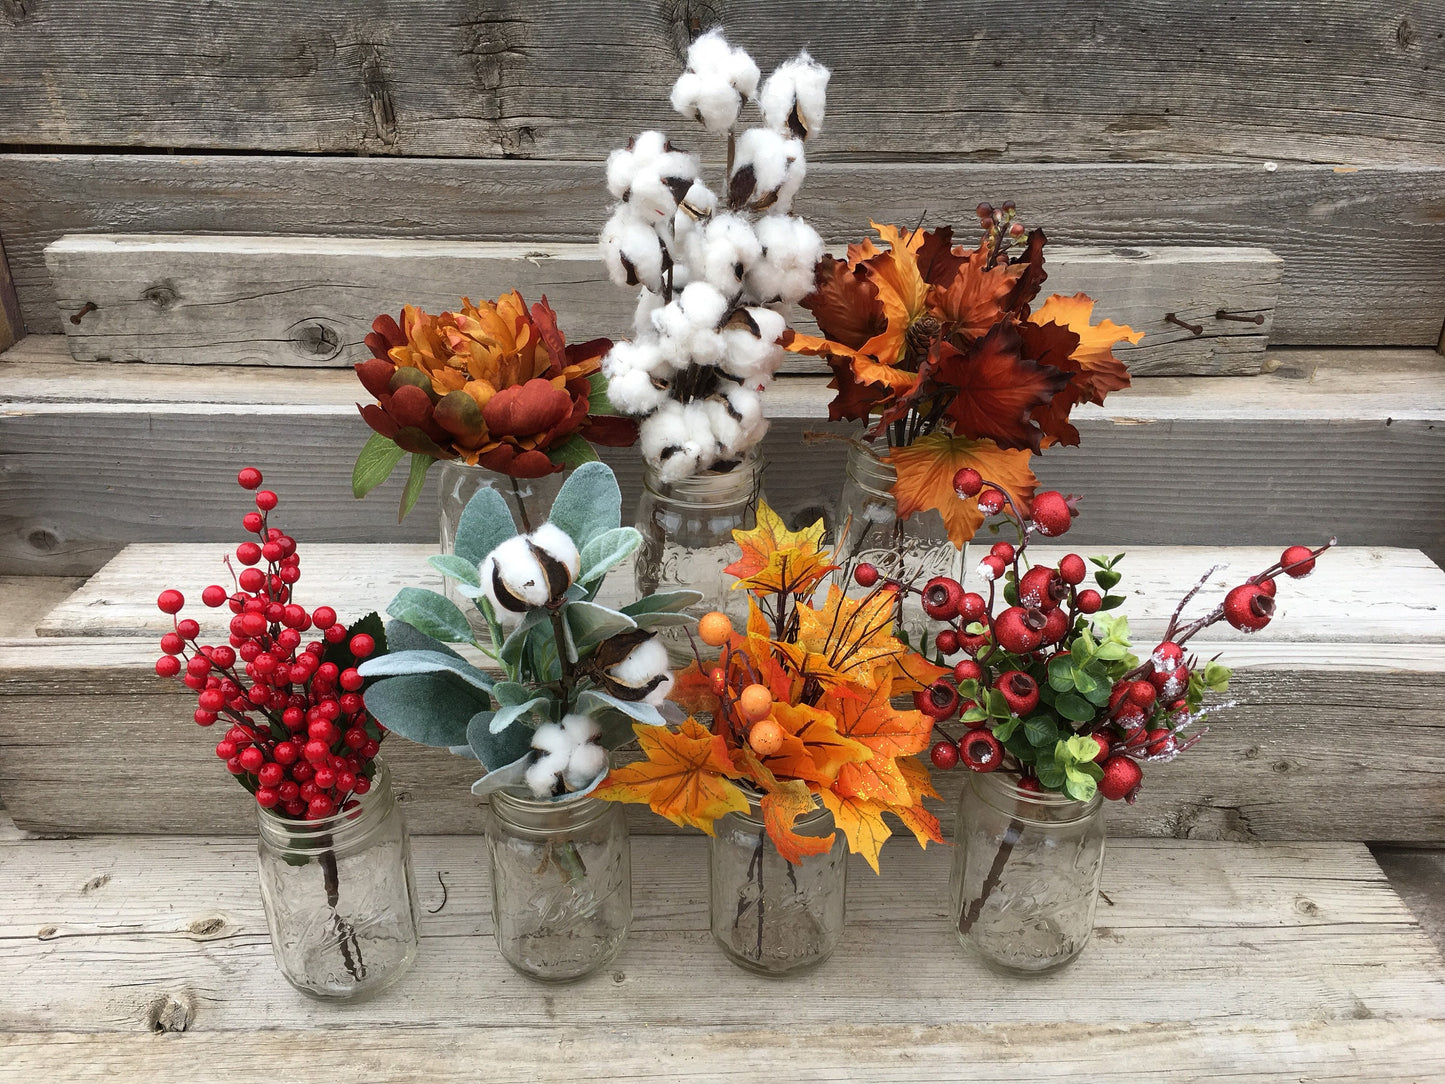 New Seasonal Bouquet Options!! Add on Flowers, Cotton Stems, Christmas Berries, Lambs Ears with Cotton Bolls, Fall Leaves, Fall Flowers